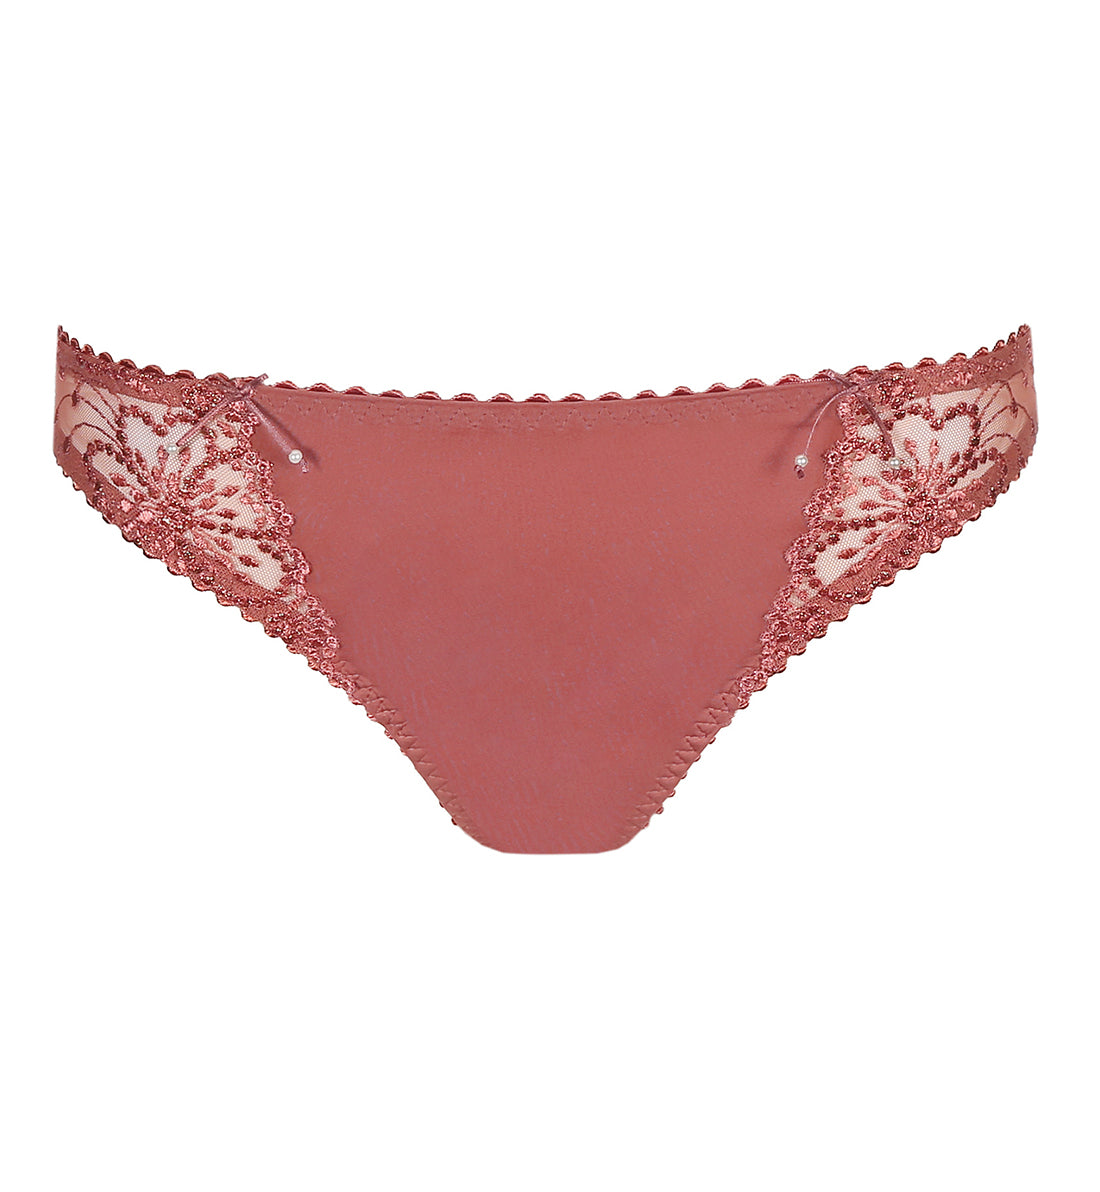 Marie Jo Jane Matching Rio Brief (0501330),Large,Red Copper - Red Copper,Large